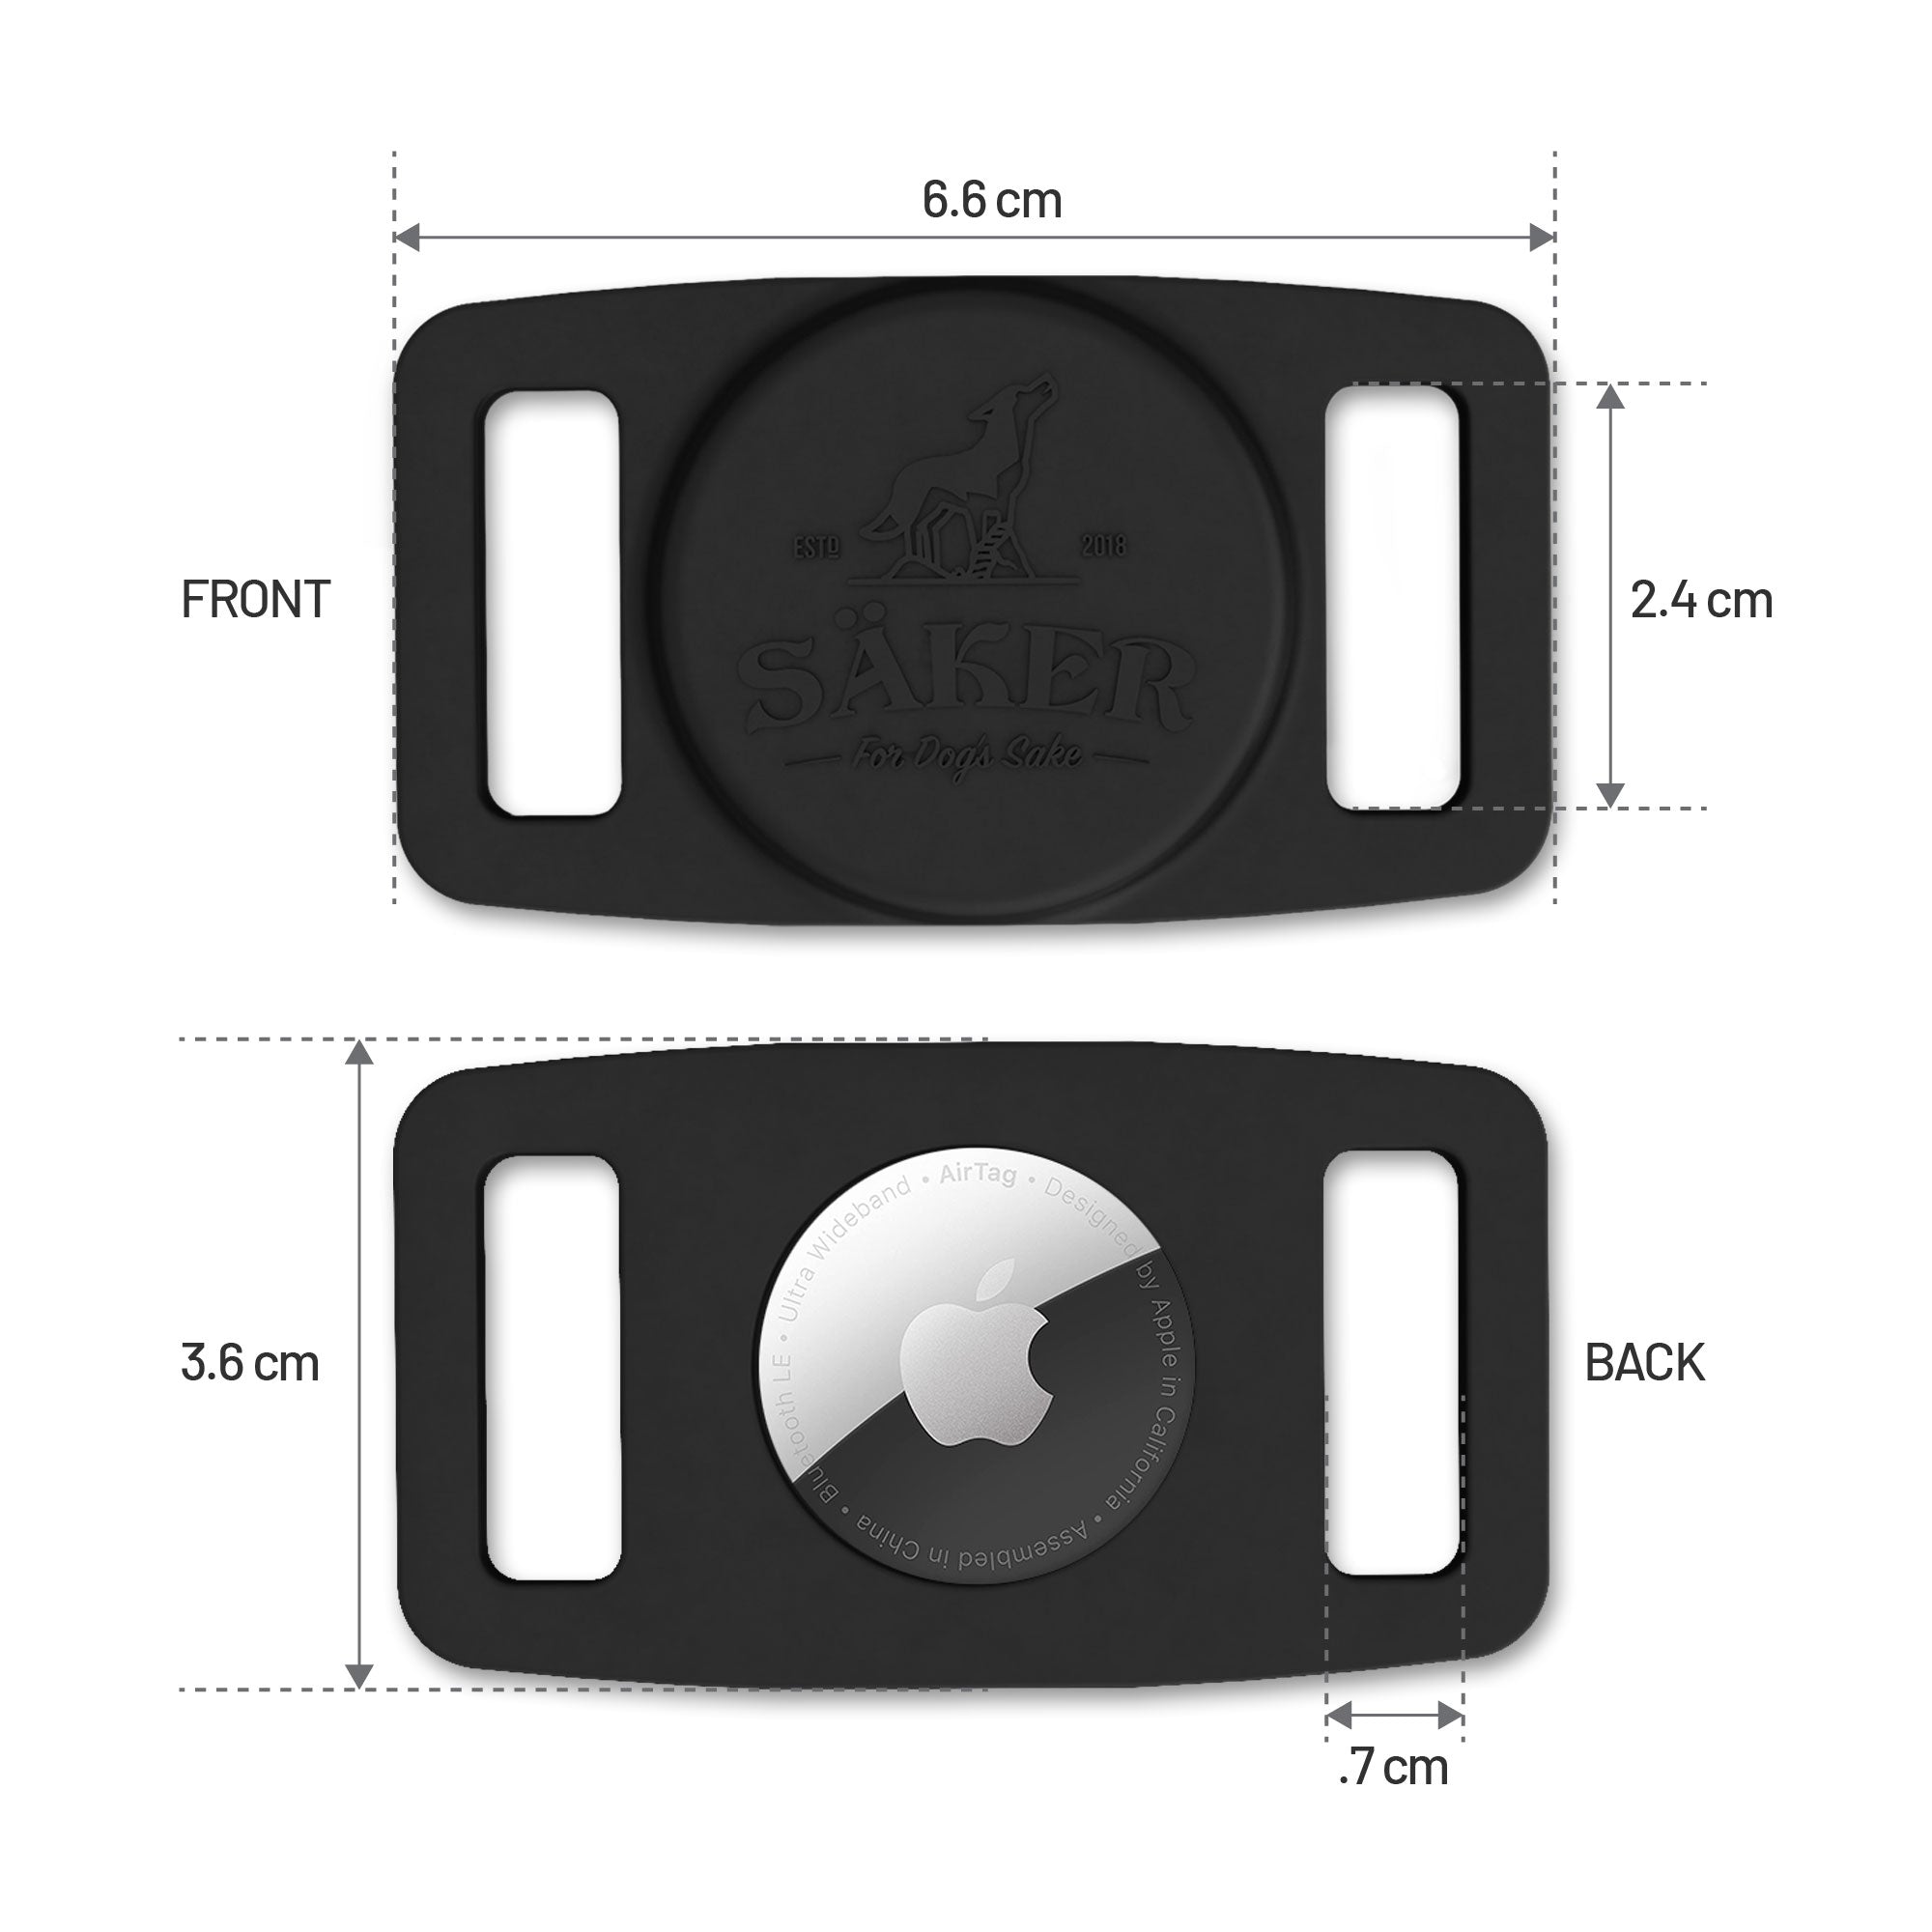 Back view and front view of the Airtag Holder with it's measurements.